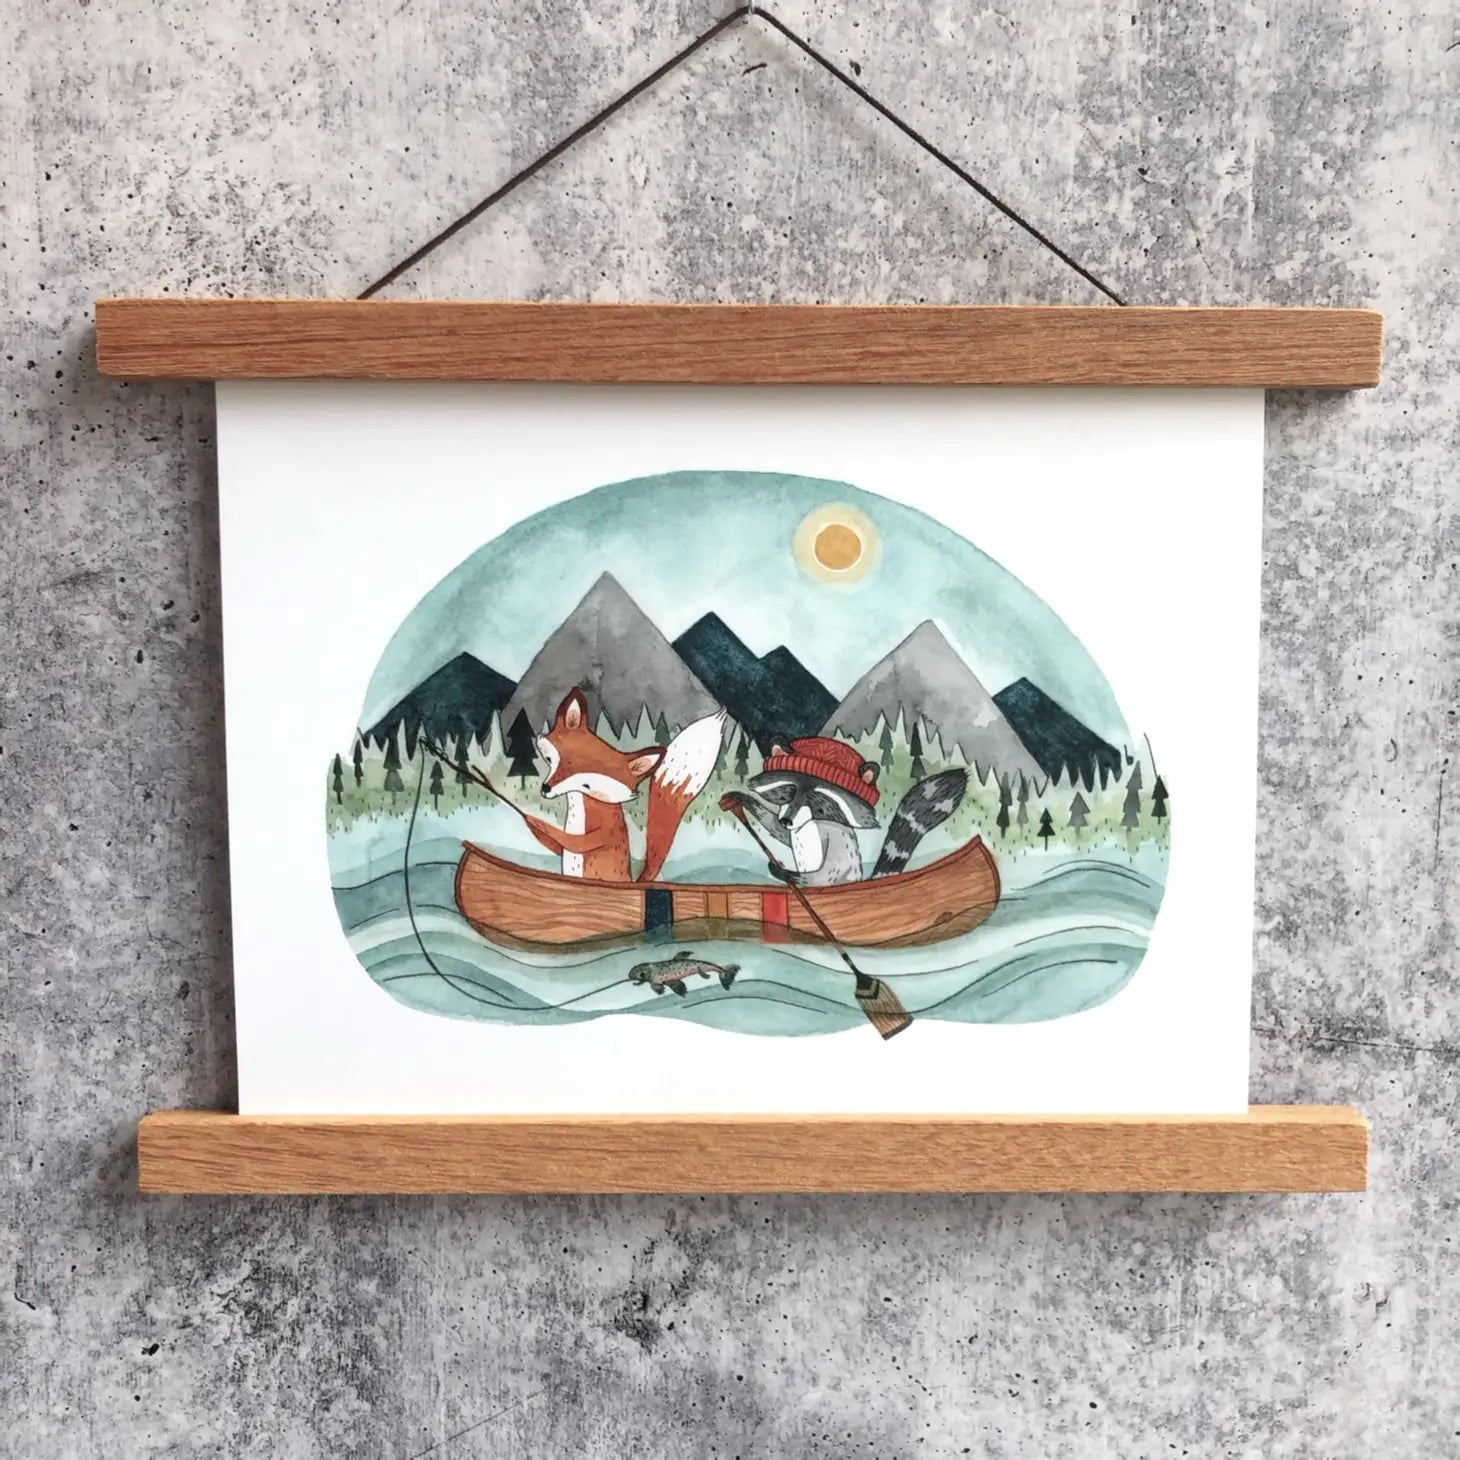 Canoe Adventure - 8x10 Art Print - Created by Little Pine Artistry Canyon & Cove